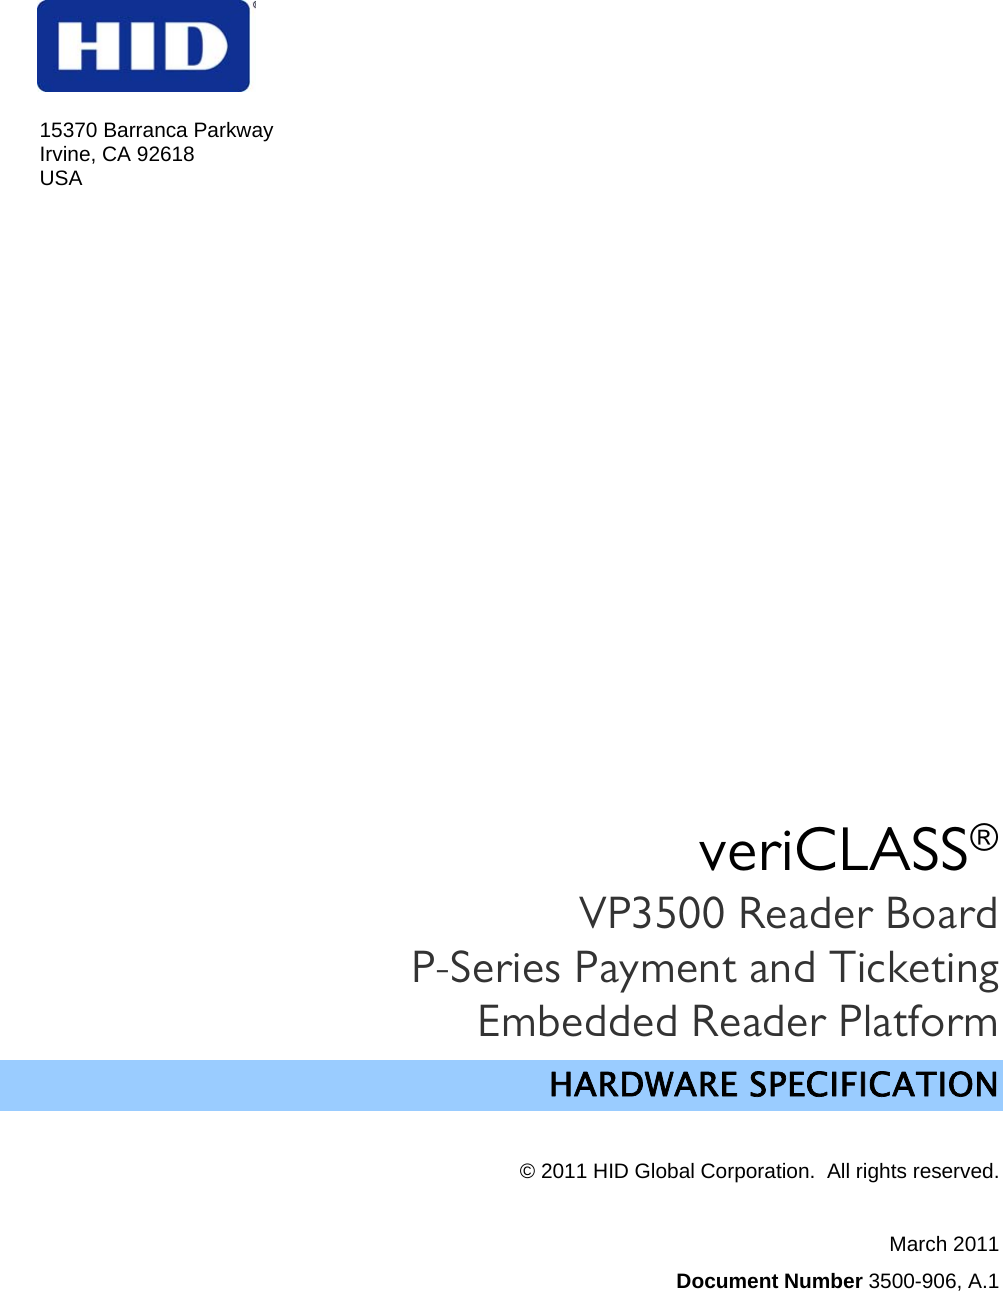 15370 Barranca Parkway Irvine, CA 92618 USA     veriCLASS®  VP3500 Reader Board P-Series Payment and Ticketing Embedded Reader Platform HARDWARE SPECIFICATION   © 2011 HID Global Corporation.  All rights reserved.  March 2011 Document Number 3500-906, A.1 